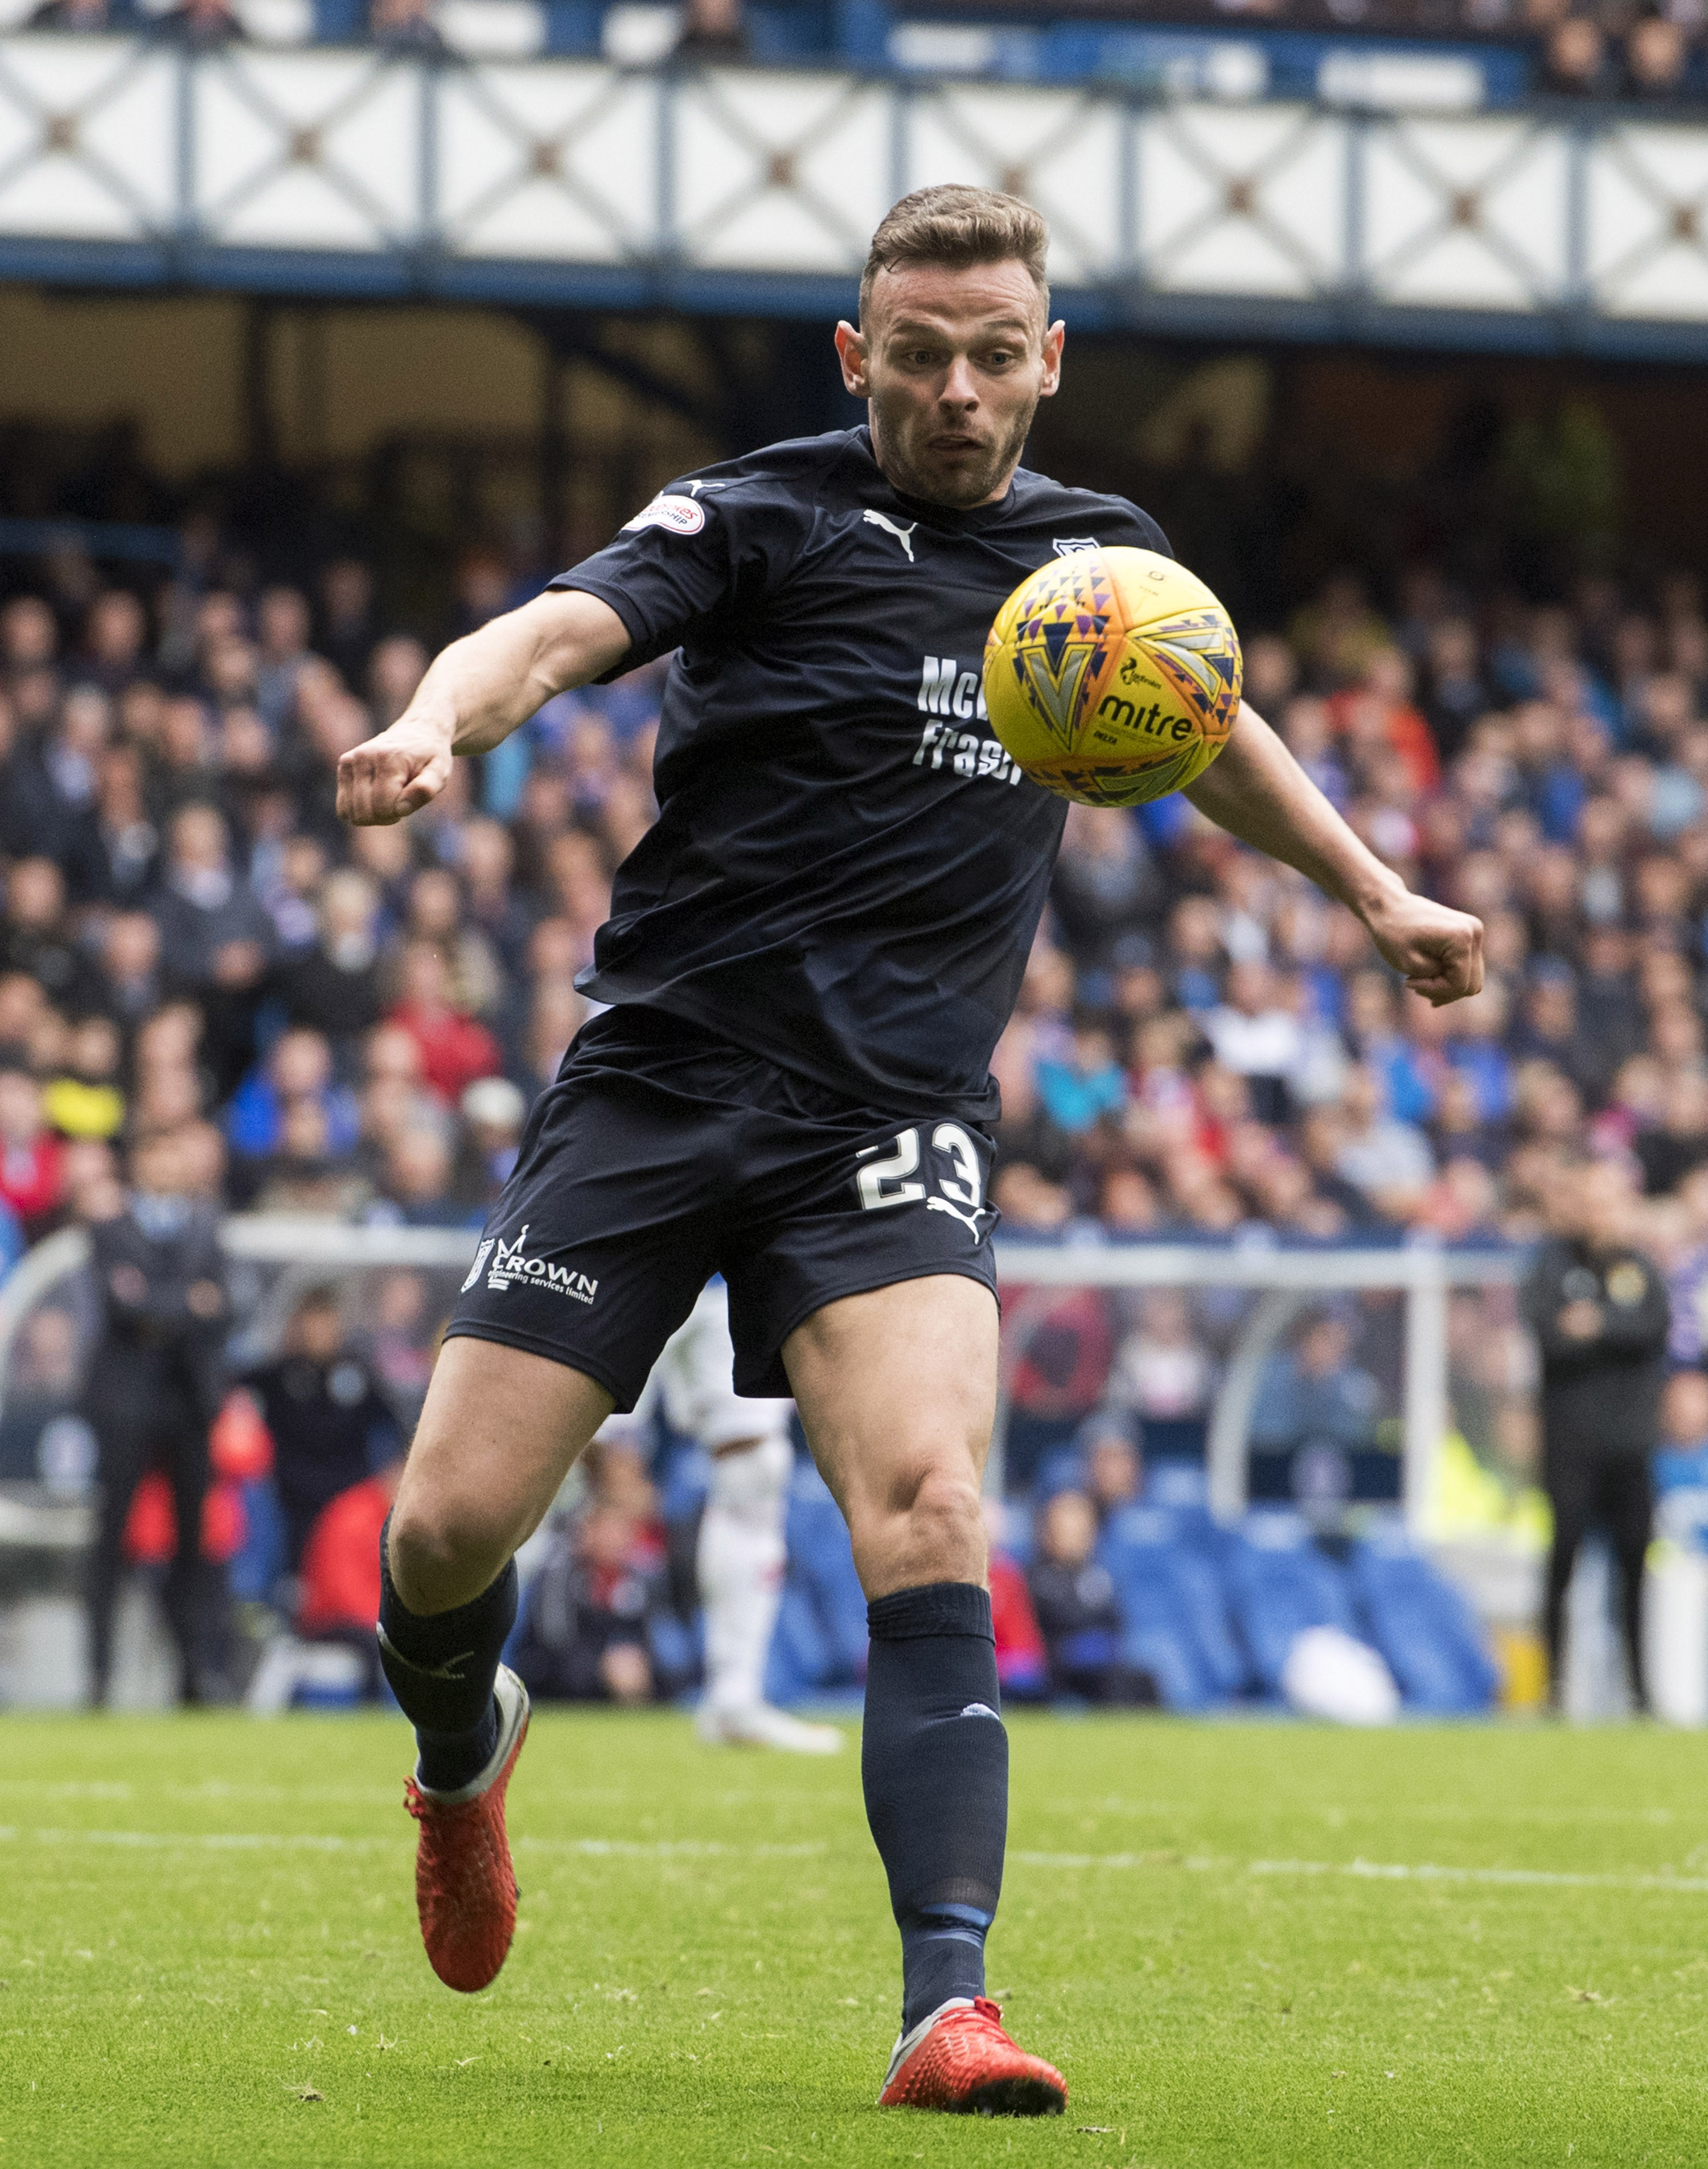 15/09/18 LADBROKES PREMIERSHIP
 RANGERS v DUNDEE (4-0)
 IBROX - GLASGOW
 Andrew Boyle in action for Dundee.